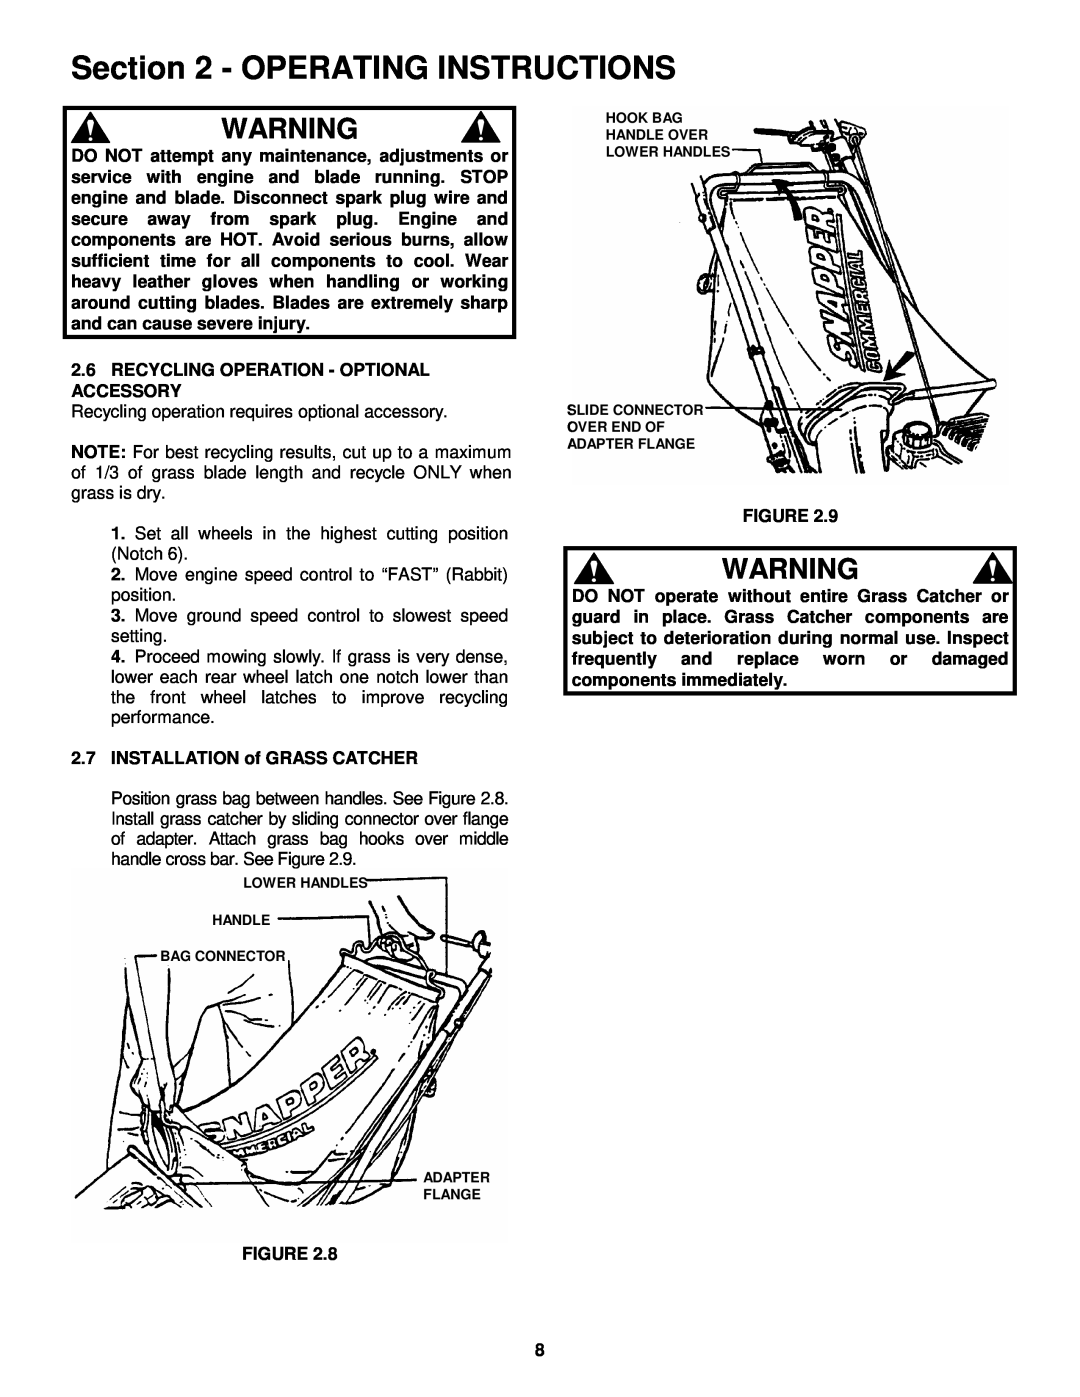 Snapper GP216512RV, C216012RV, GP215512KWV Operating Instructions, 2.6RECYCLING OPERATION - OPTIONAL ACCESSORY 